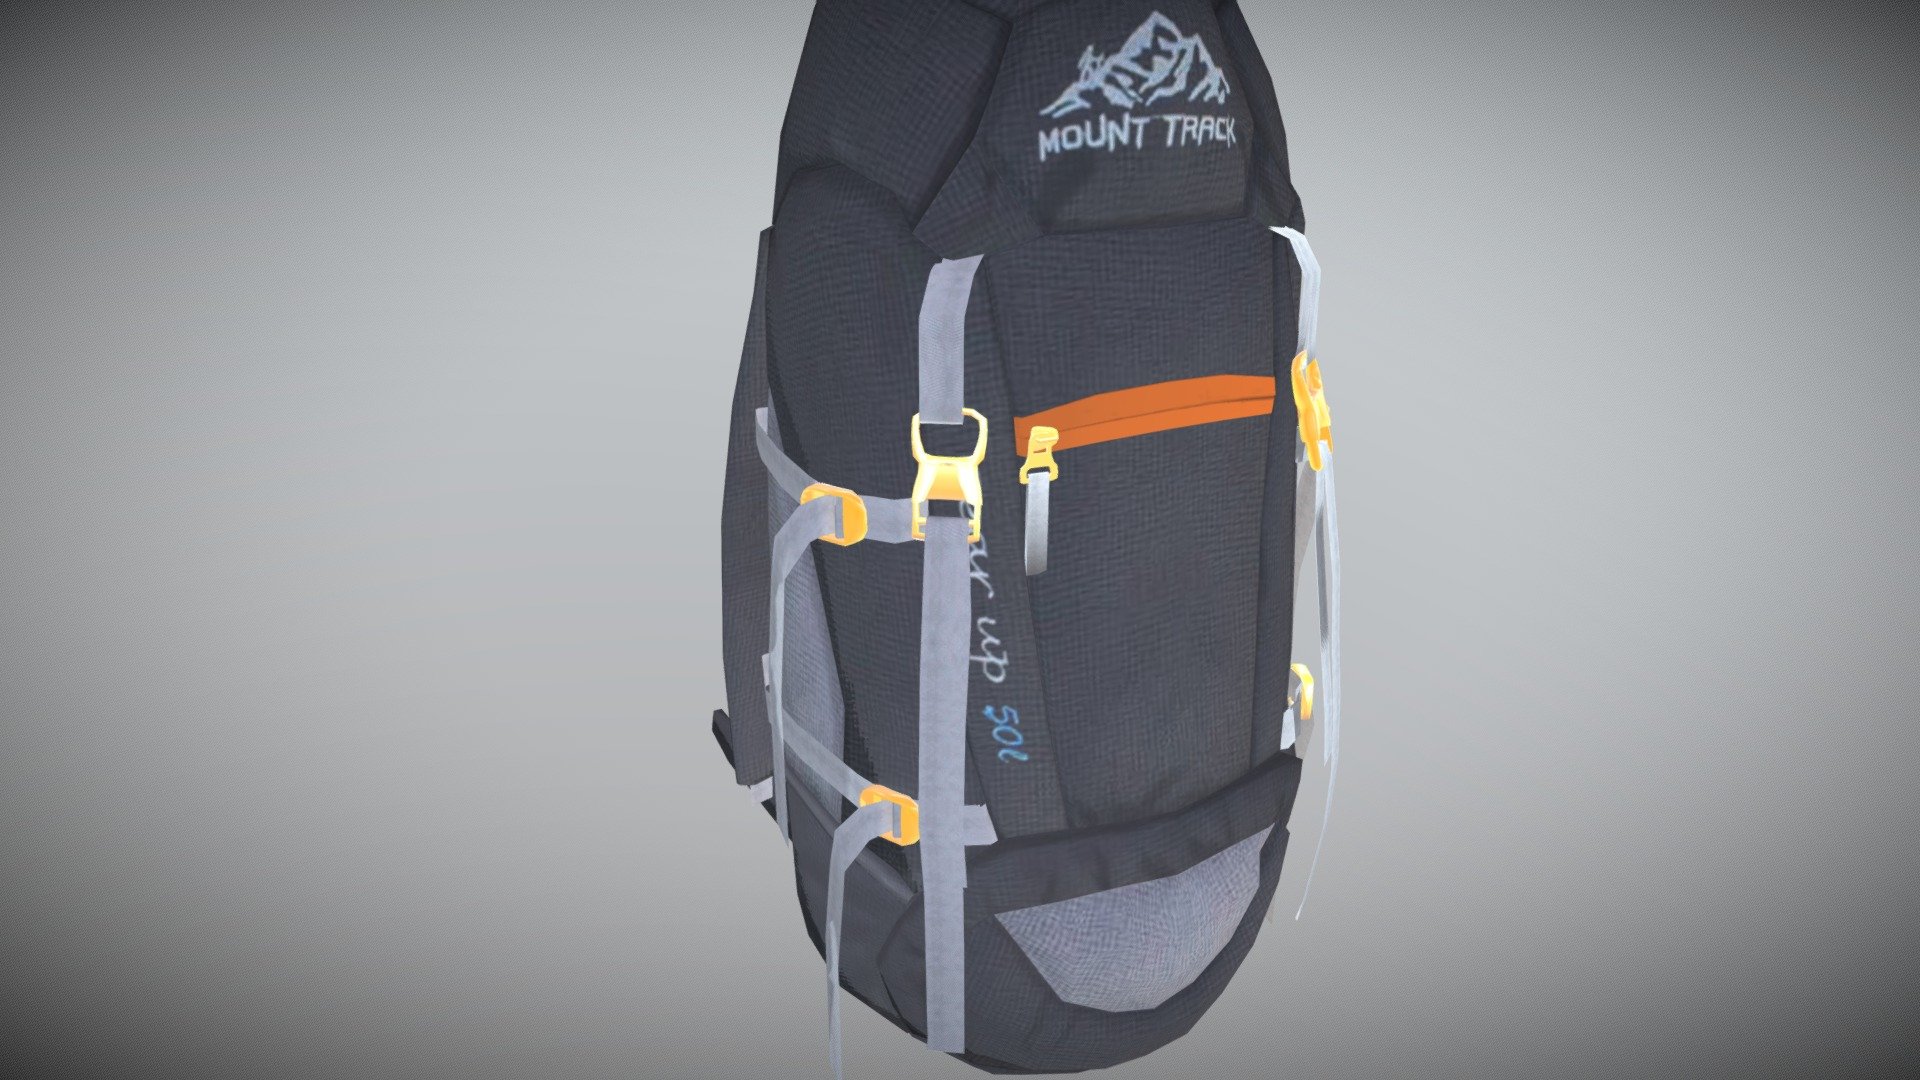 Mountrack bag model_Basic lowpoly modeling use 3ds max and photoshop - Mountain Track Bag - Download Free 3D model by siddharthkalbage 3d model